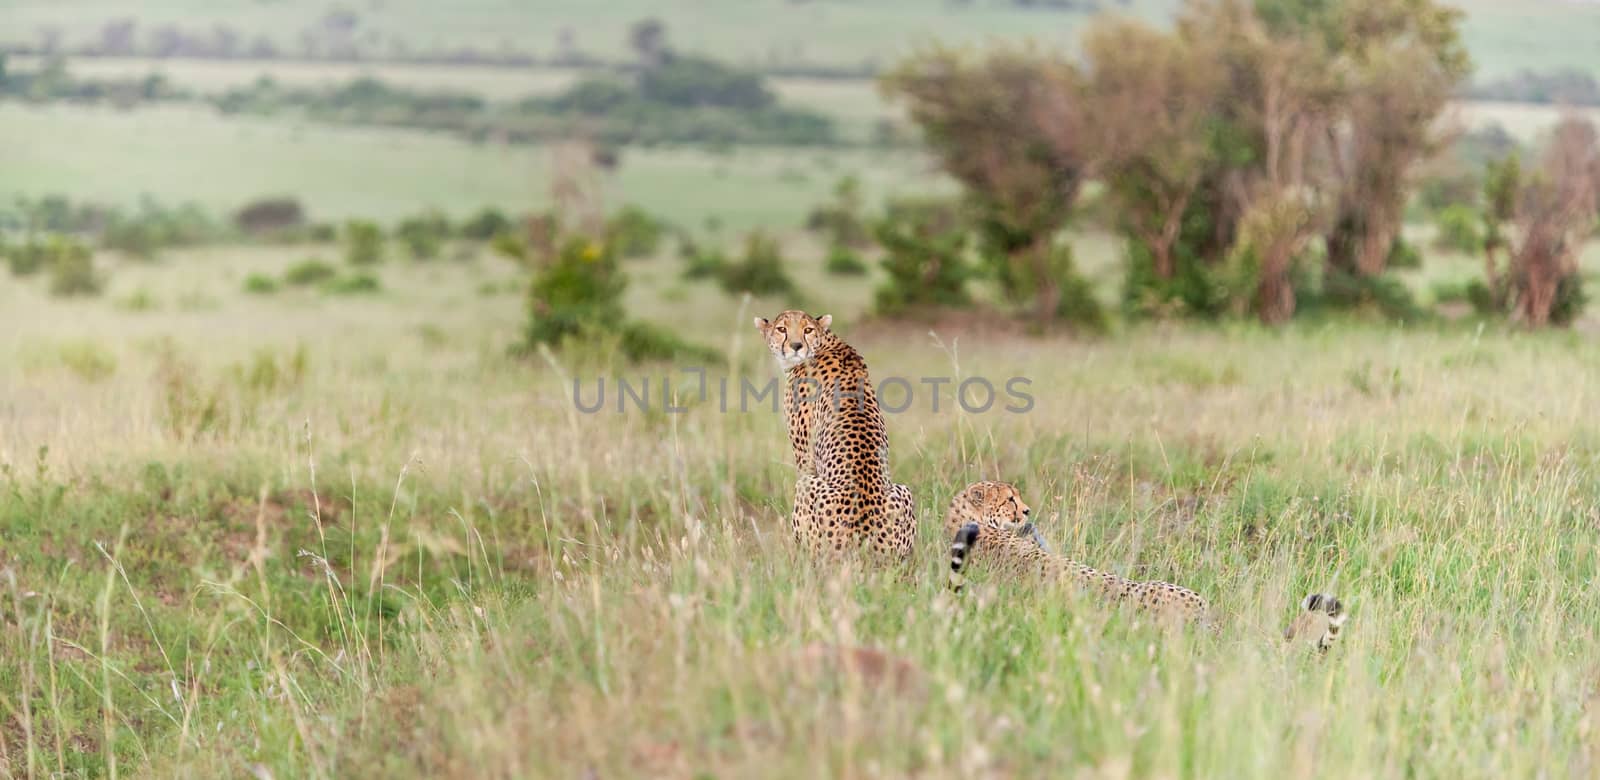 The two cheetahs by master1305